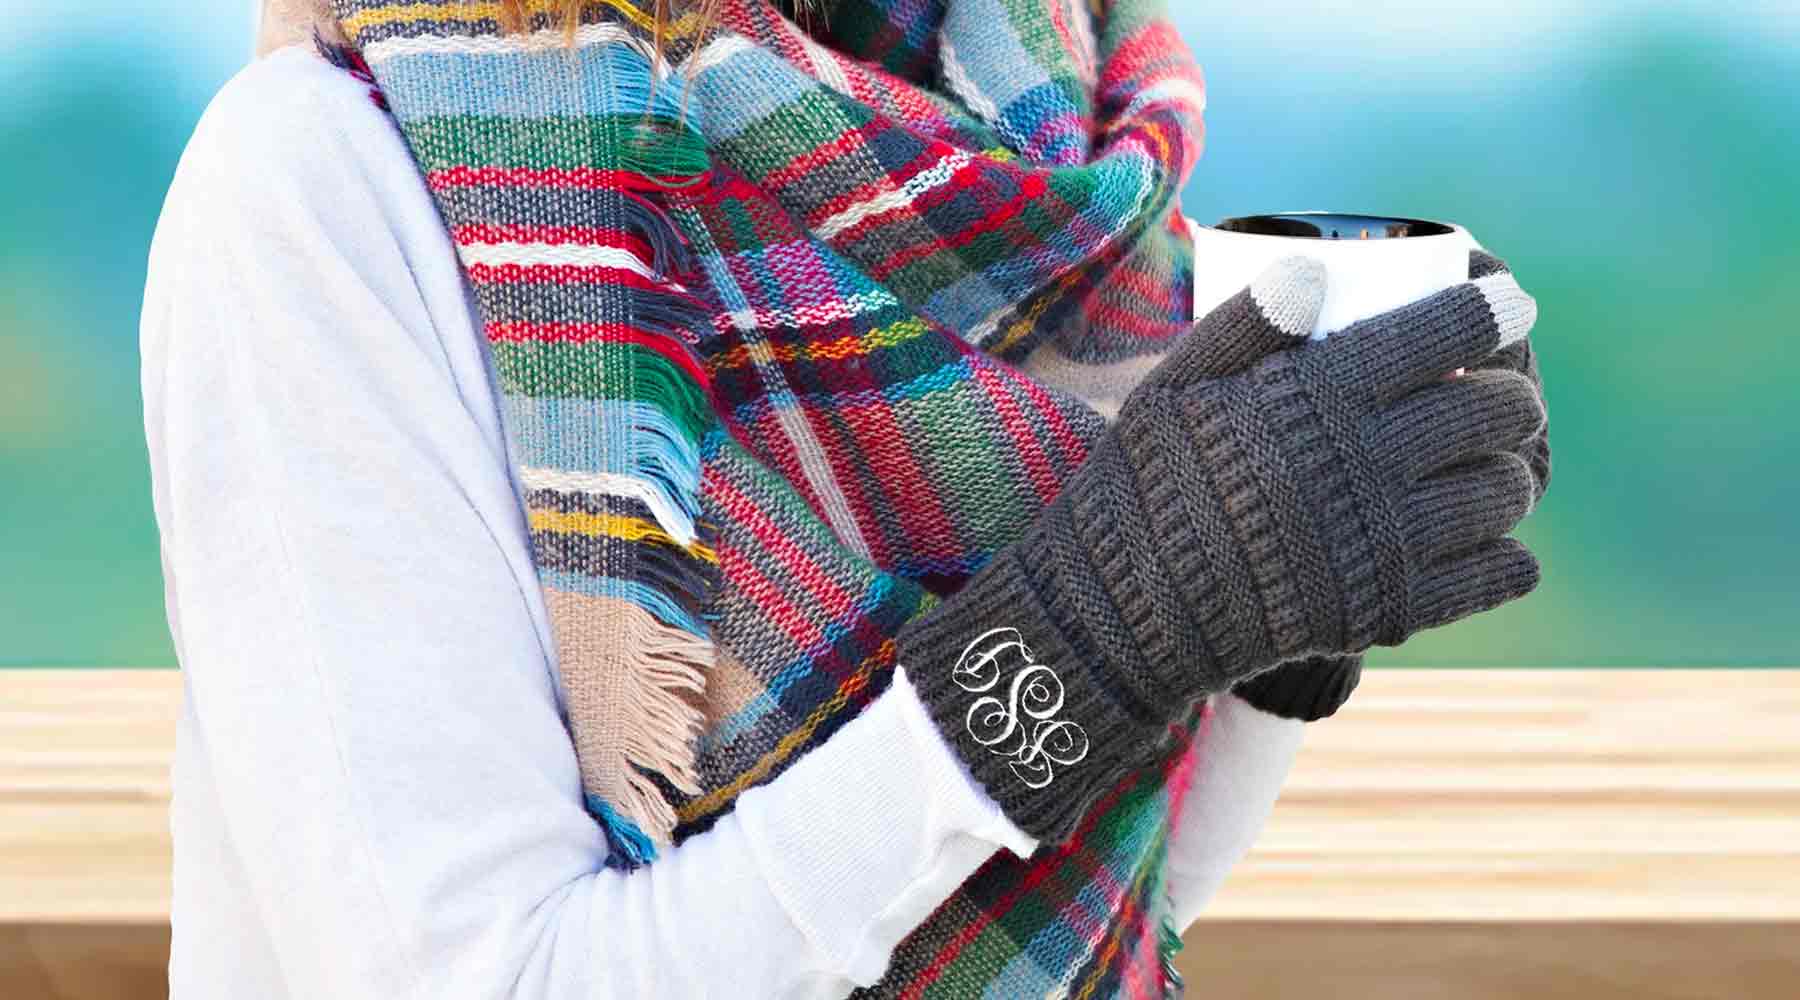 unique gifts for graduating seniors are touchscreen gloves